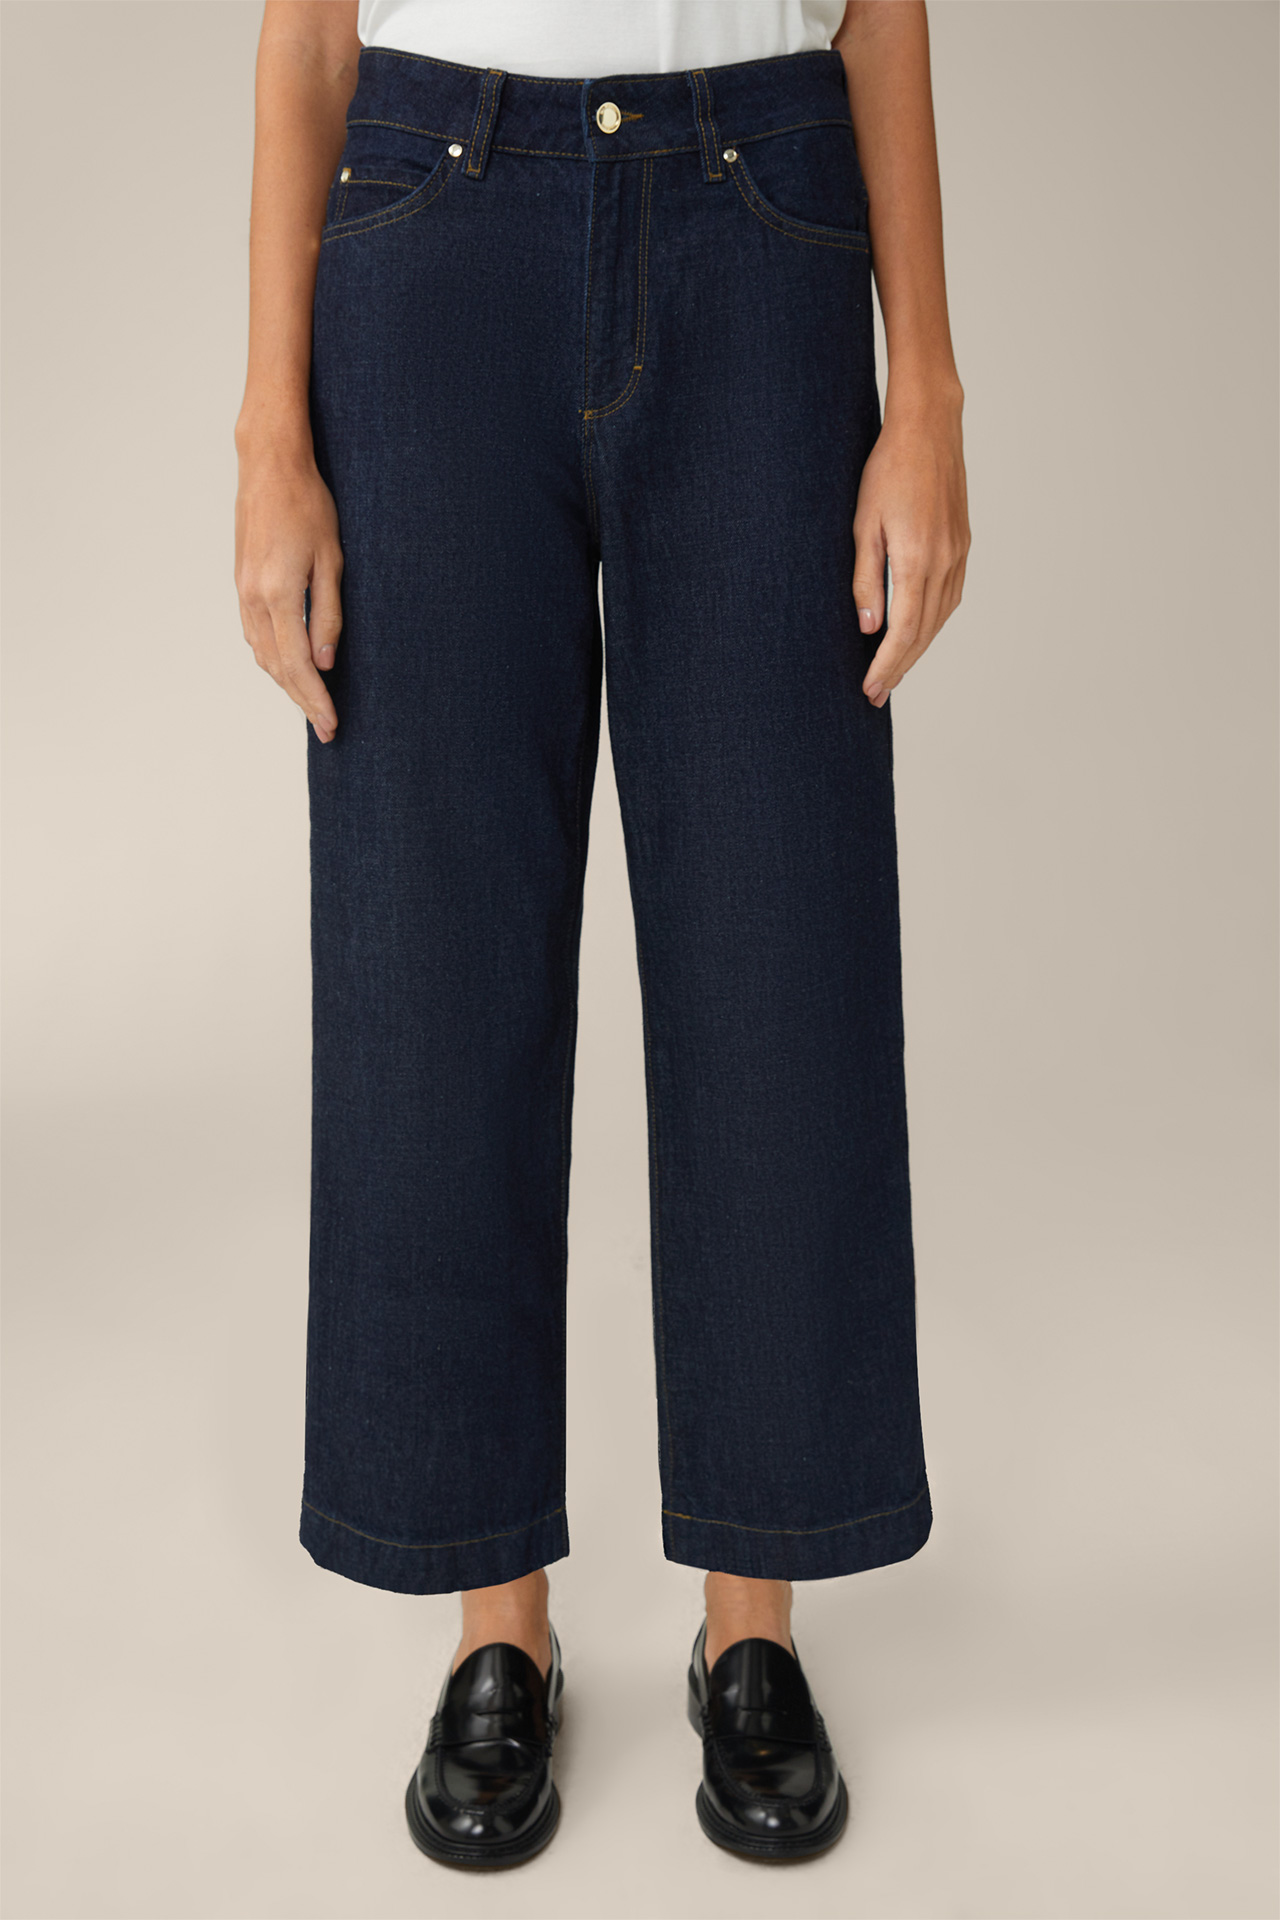 Jeans-Culotte in Dark Blue washed